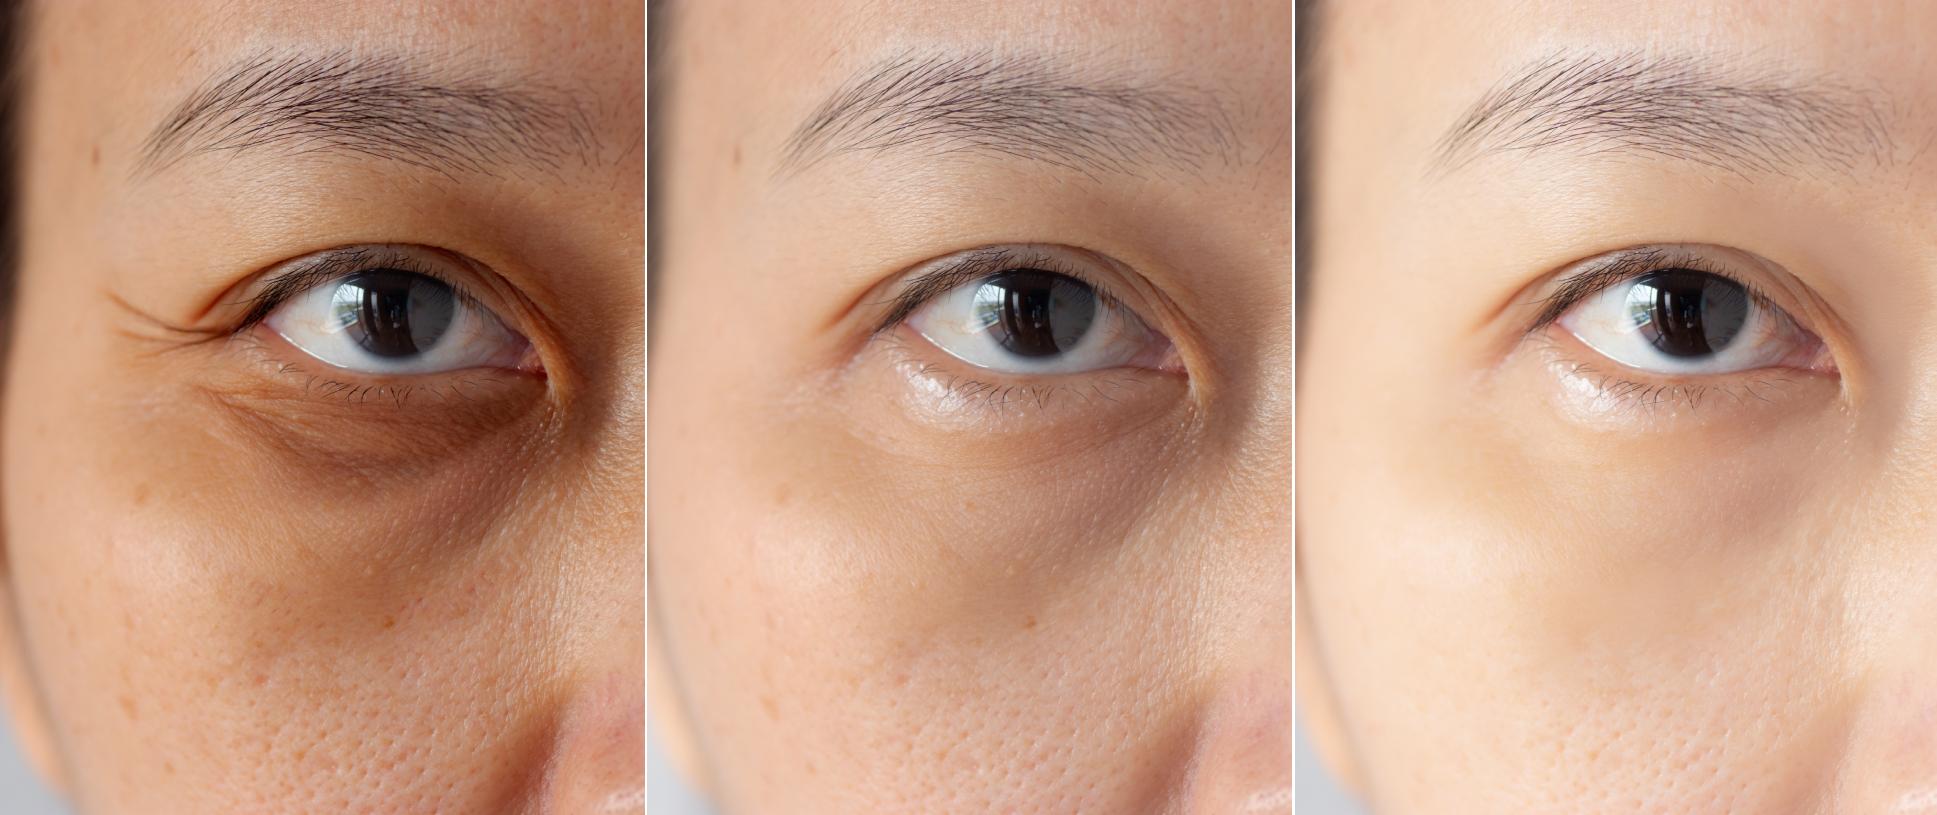 three pictures compared effect before and after treatment. under eyes with problems of dark circles